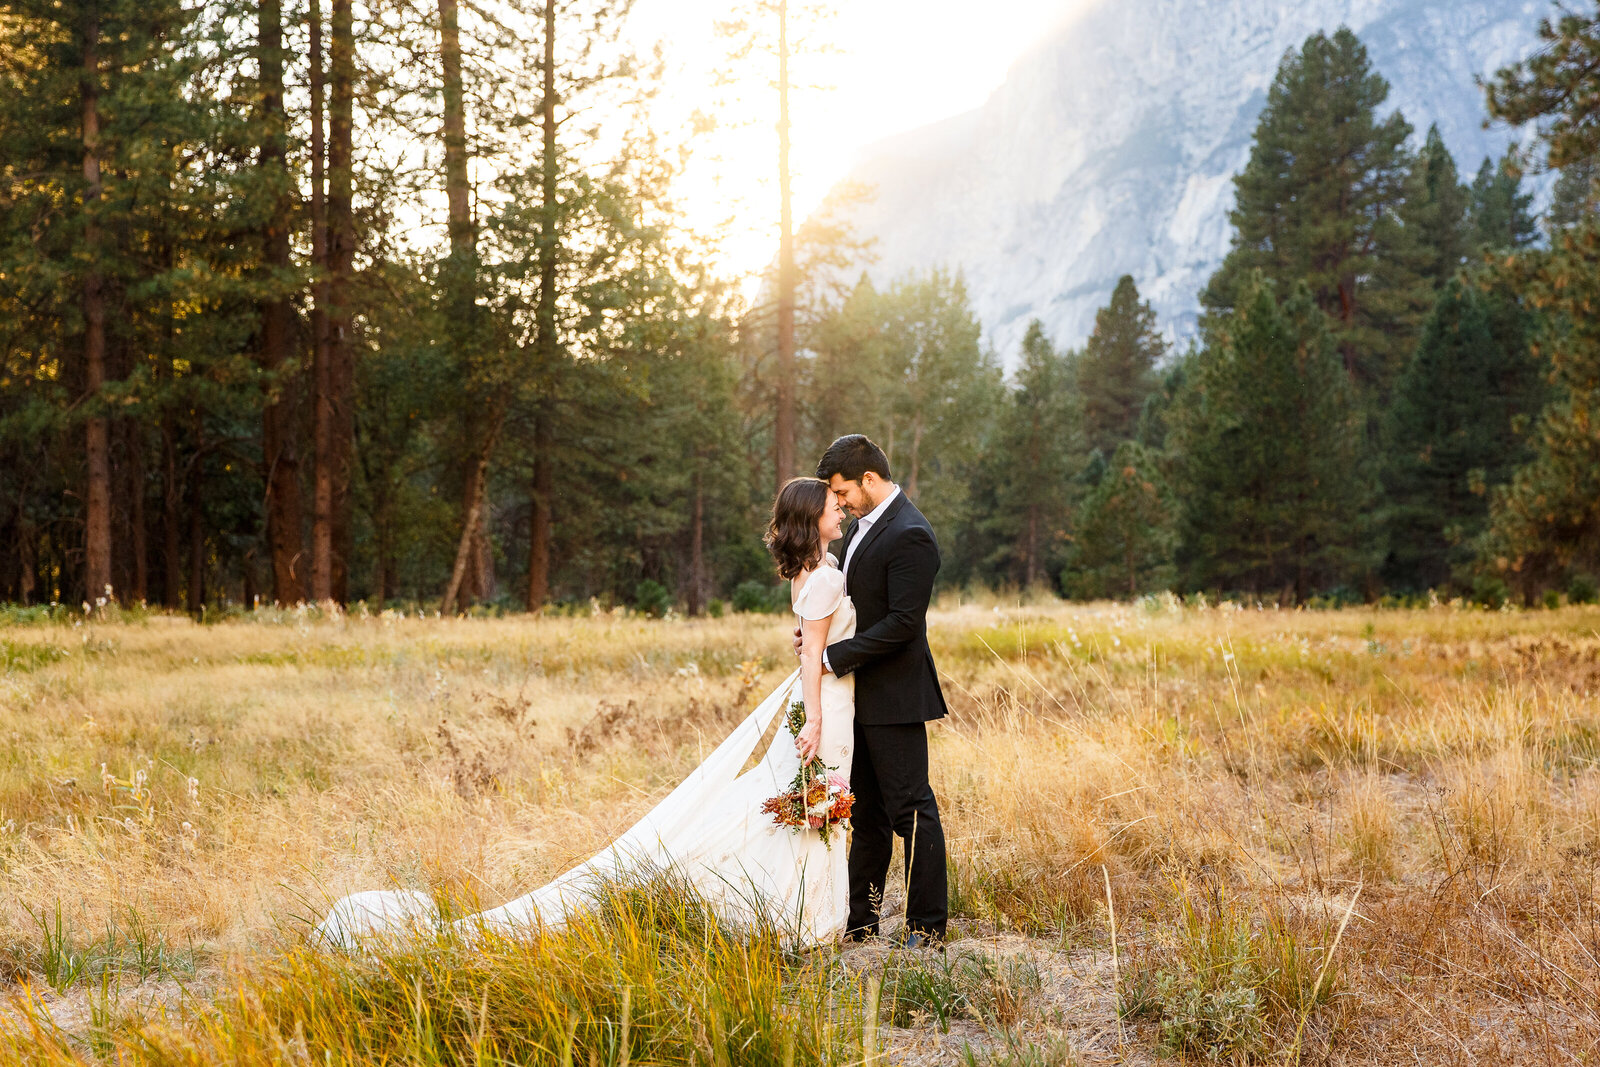 An eloping couple stares into each other's eyes at sunset in Yosemite.